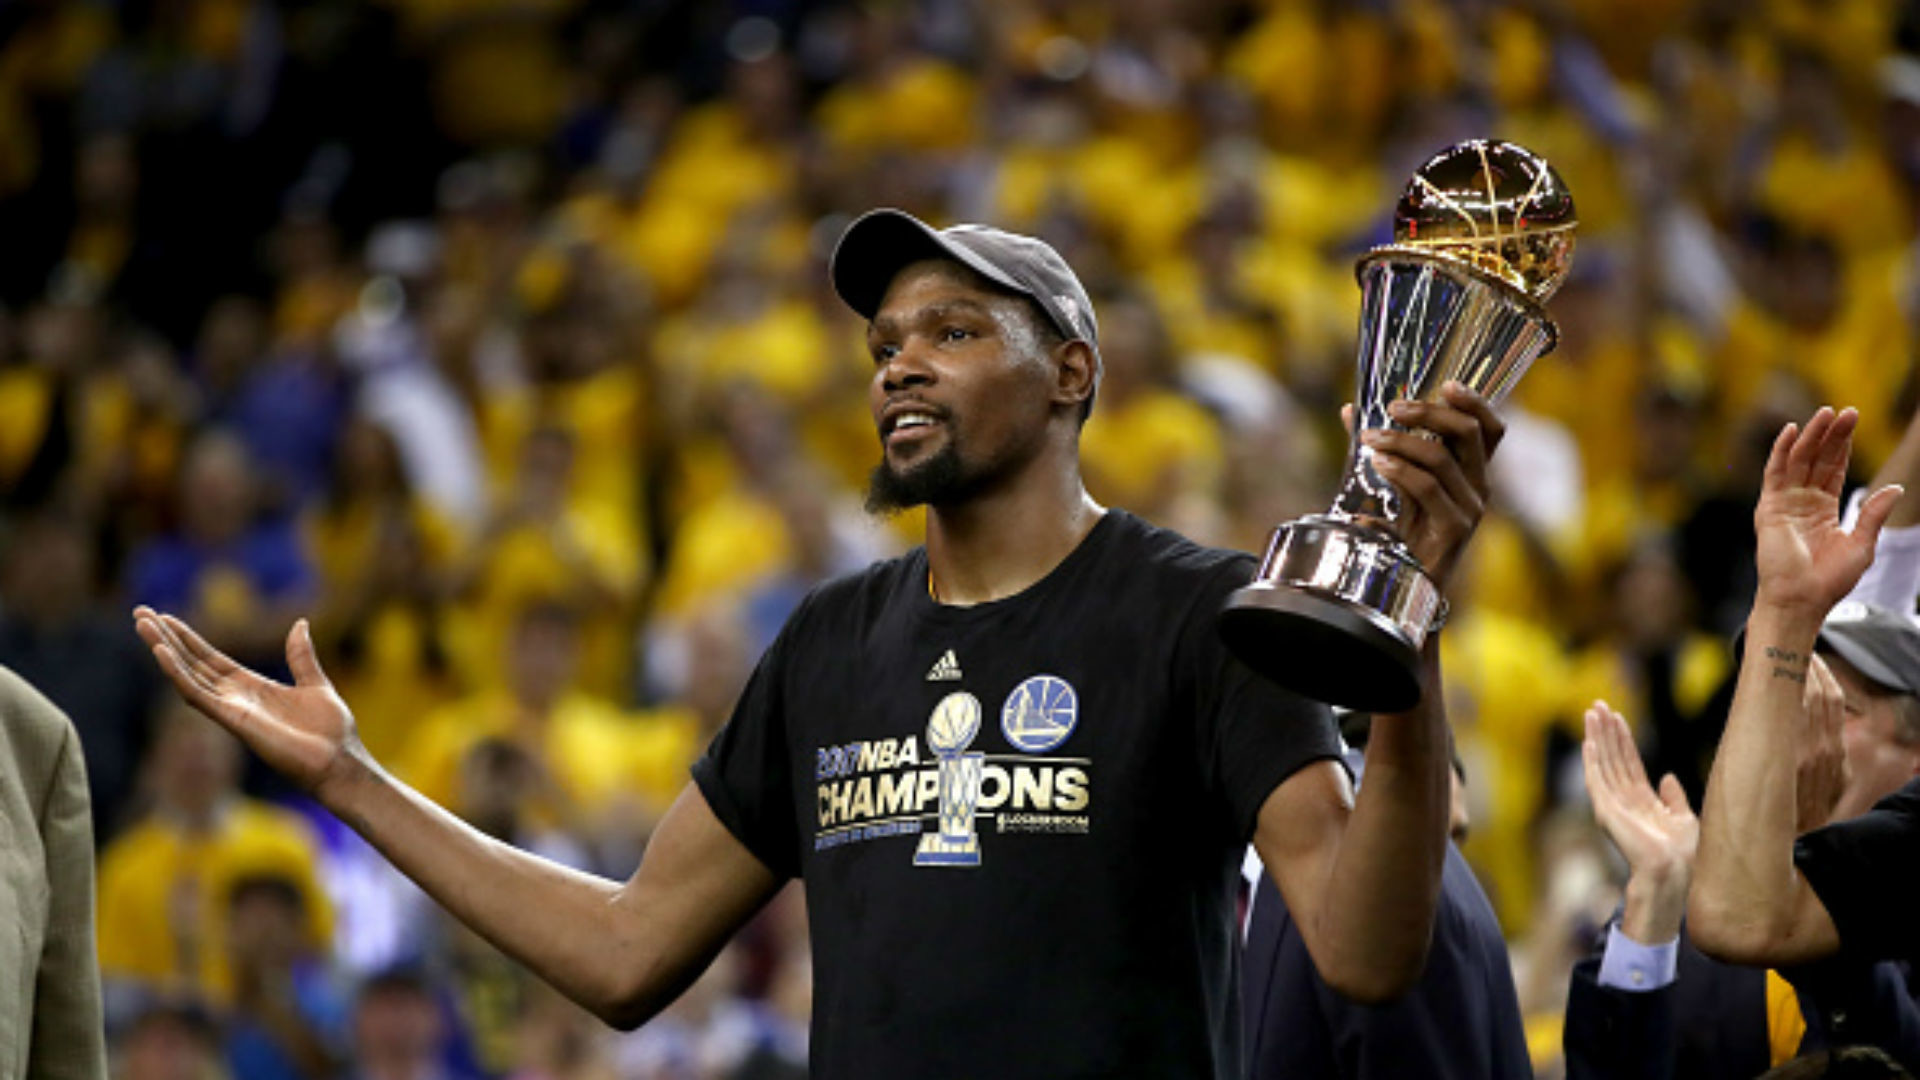 1920x1080 Golden State Warriors' MVP Kevin Durant adds an important title: champion